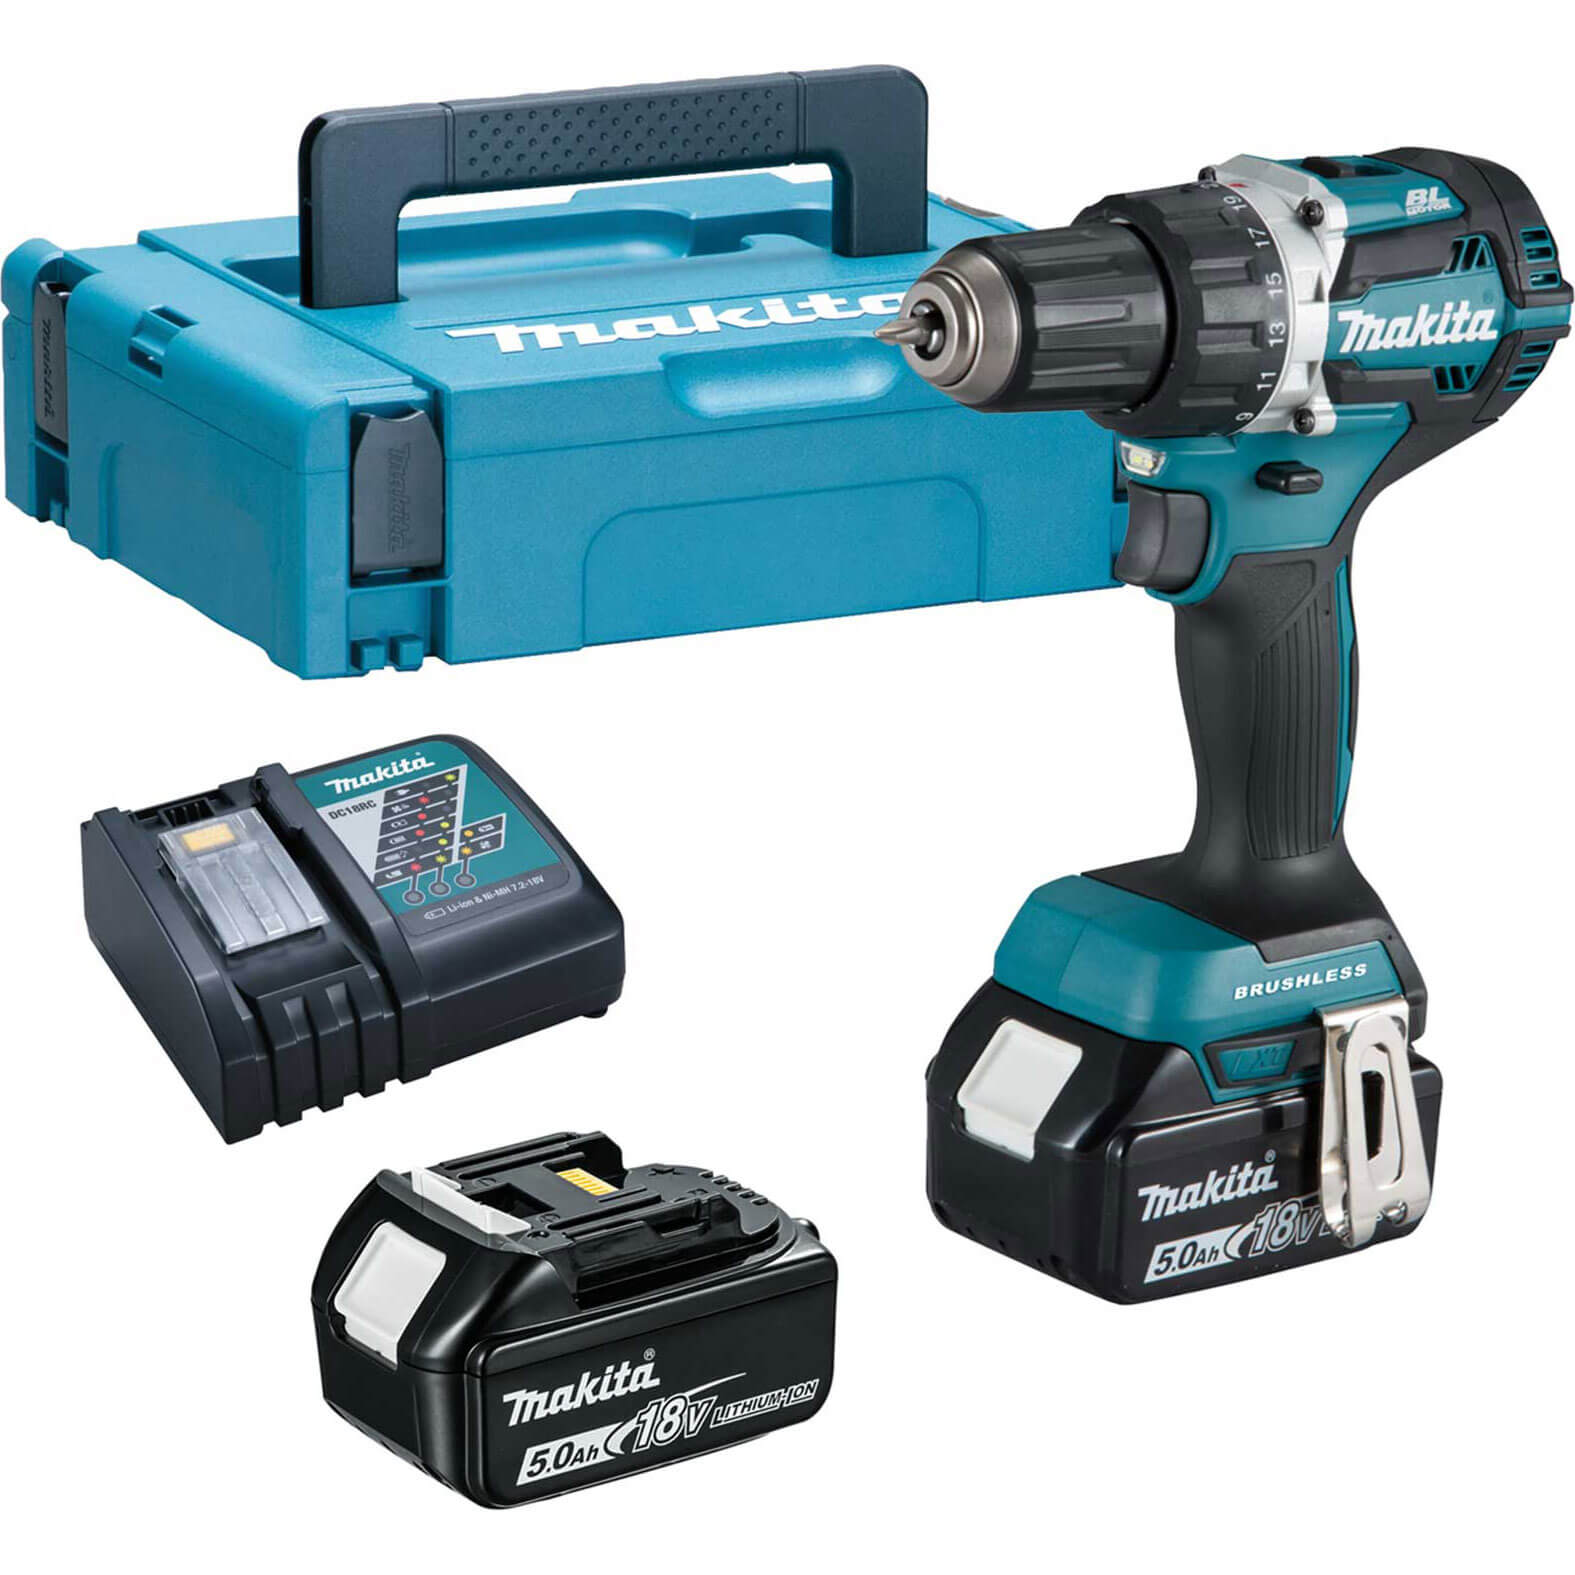 Image of Makita DDF484 18v LXT Cordless Brushless Drill Driver 2 x 5ah Li-ion Charger Case